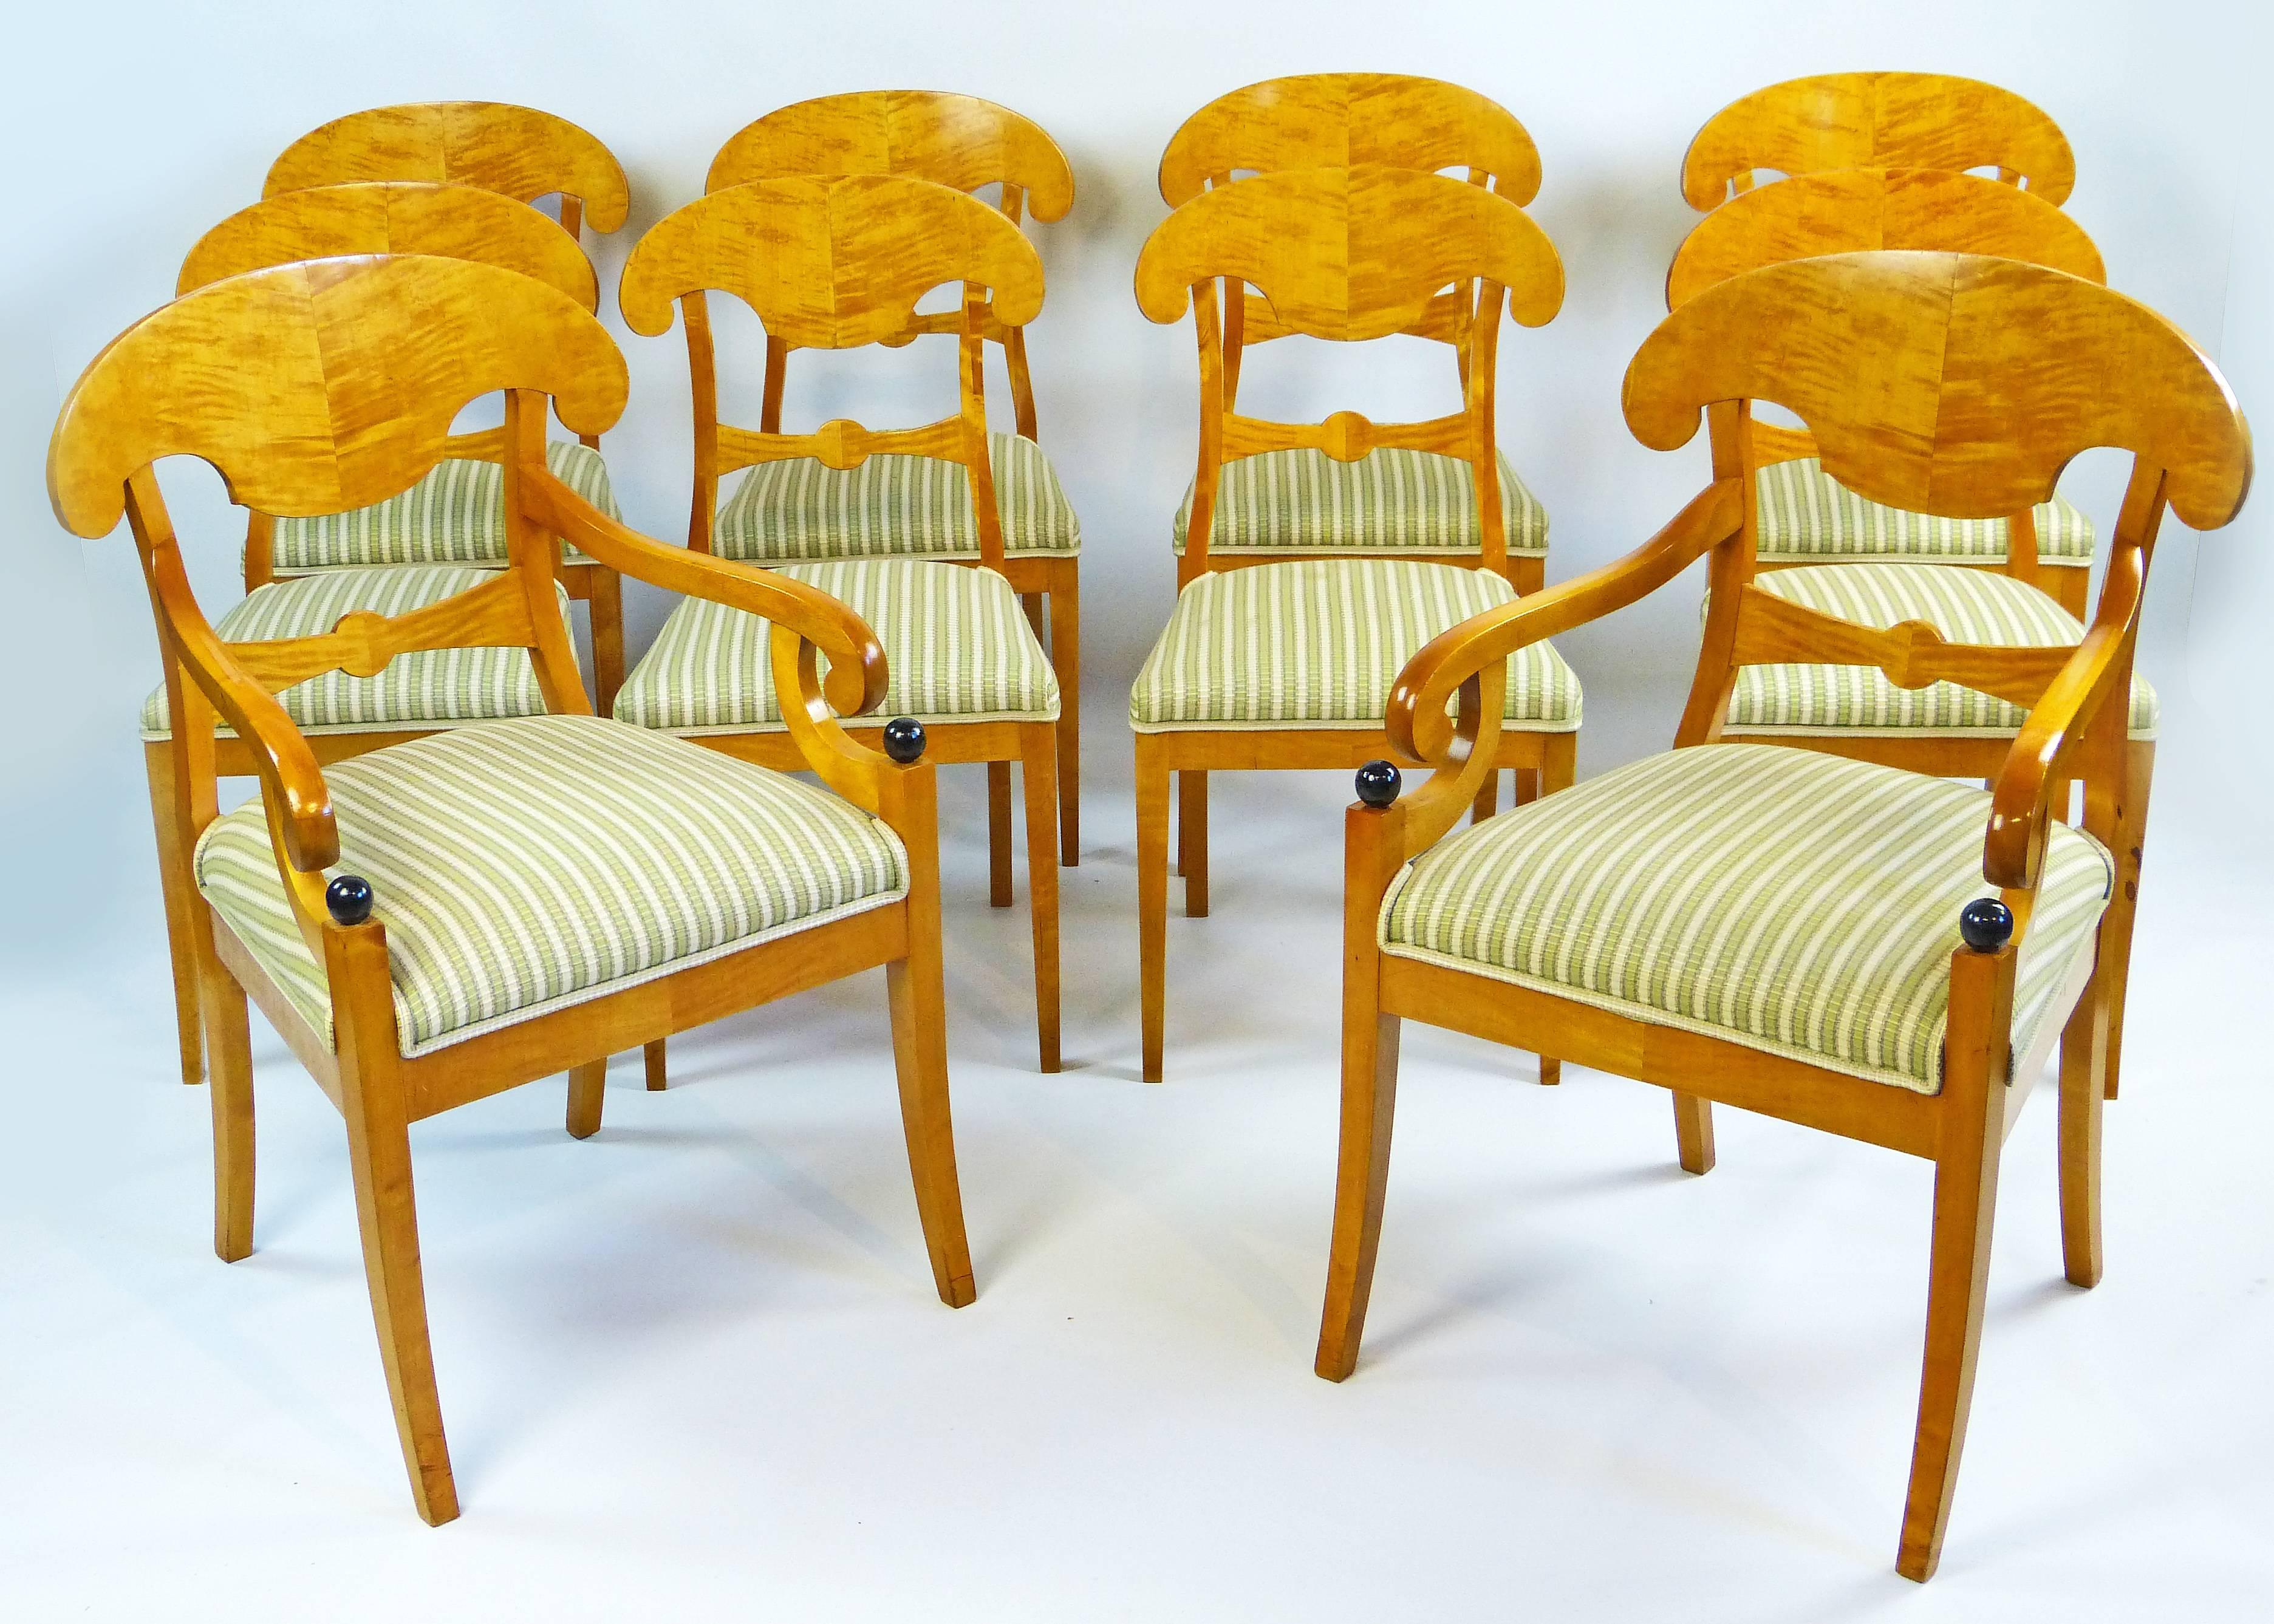 Outstanding and rare set of ten 19th century satin birch dining chairs of Swedish origin composed of eight chairs and two slightly larger armchairs for each end of the dining table. Truly outstanding color solid birchwood structure and satin